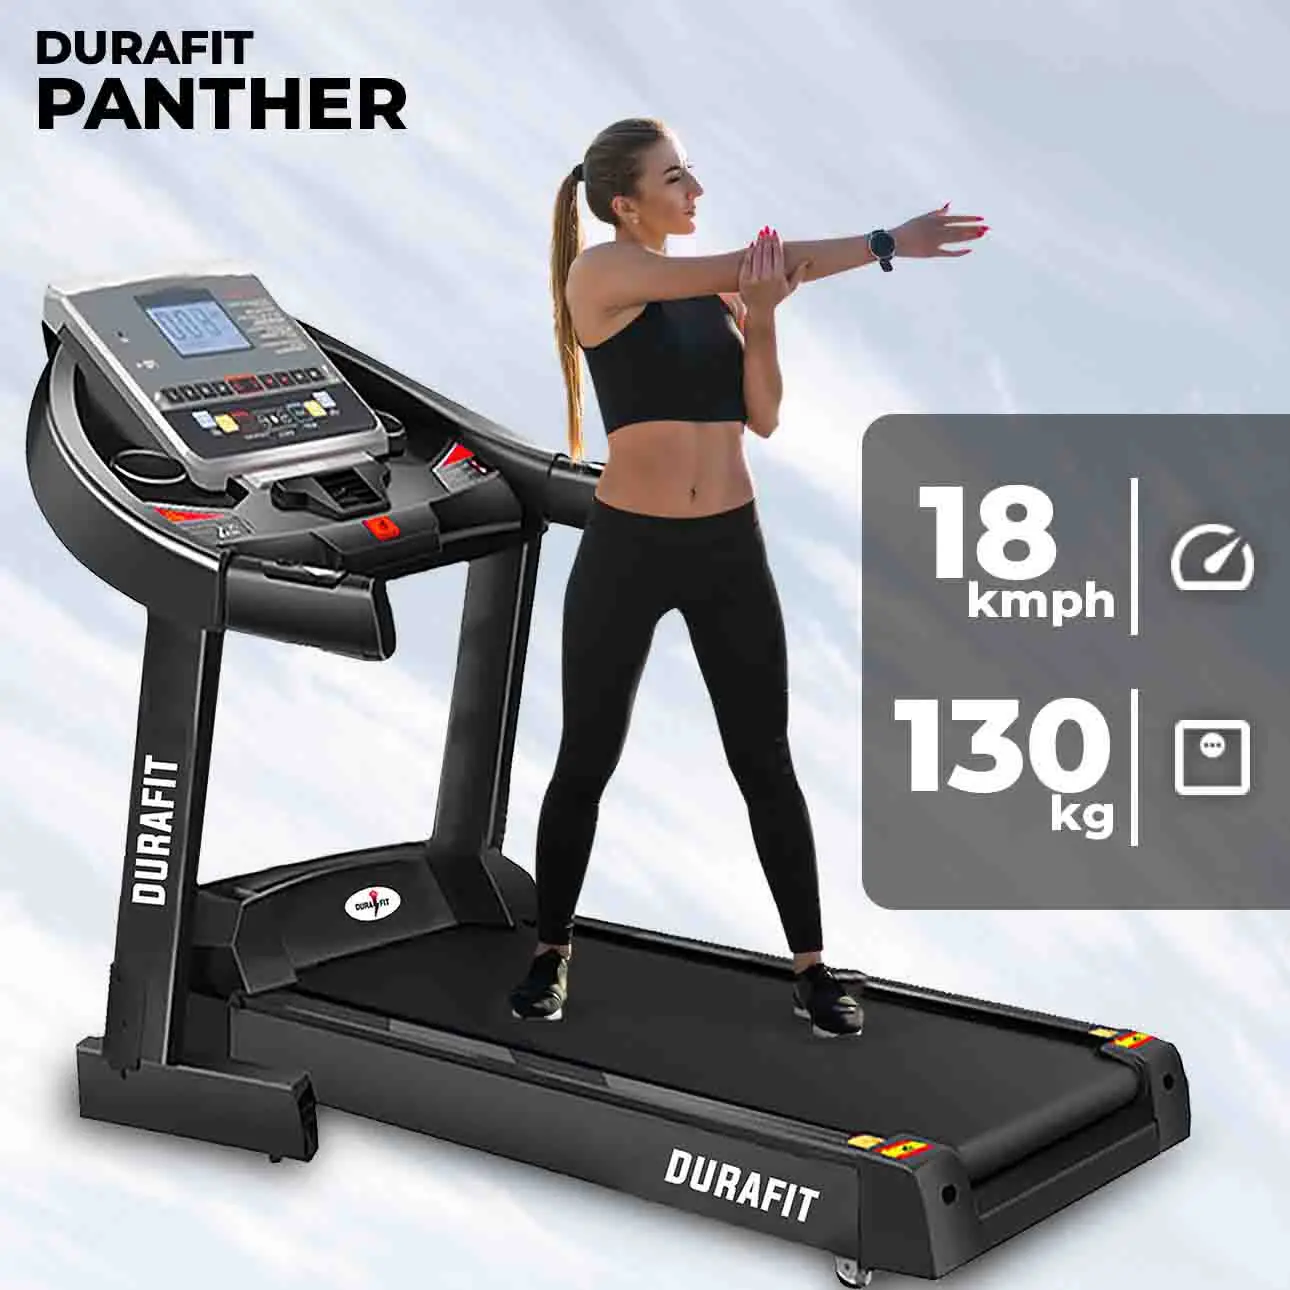 Durafit Panther Treadmill with Max User Weight of 130kg